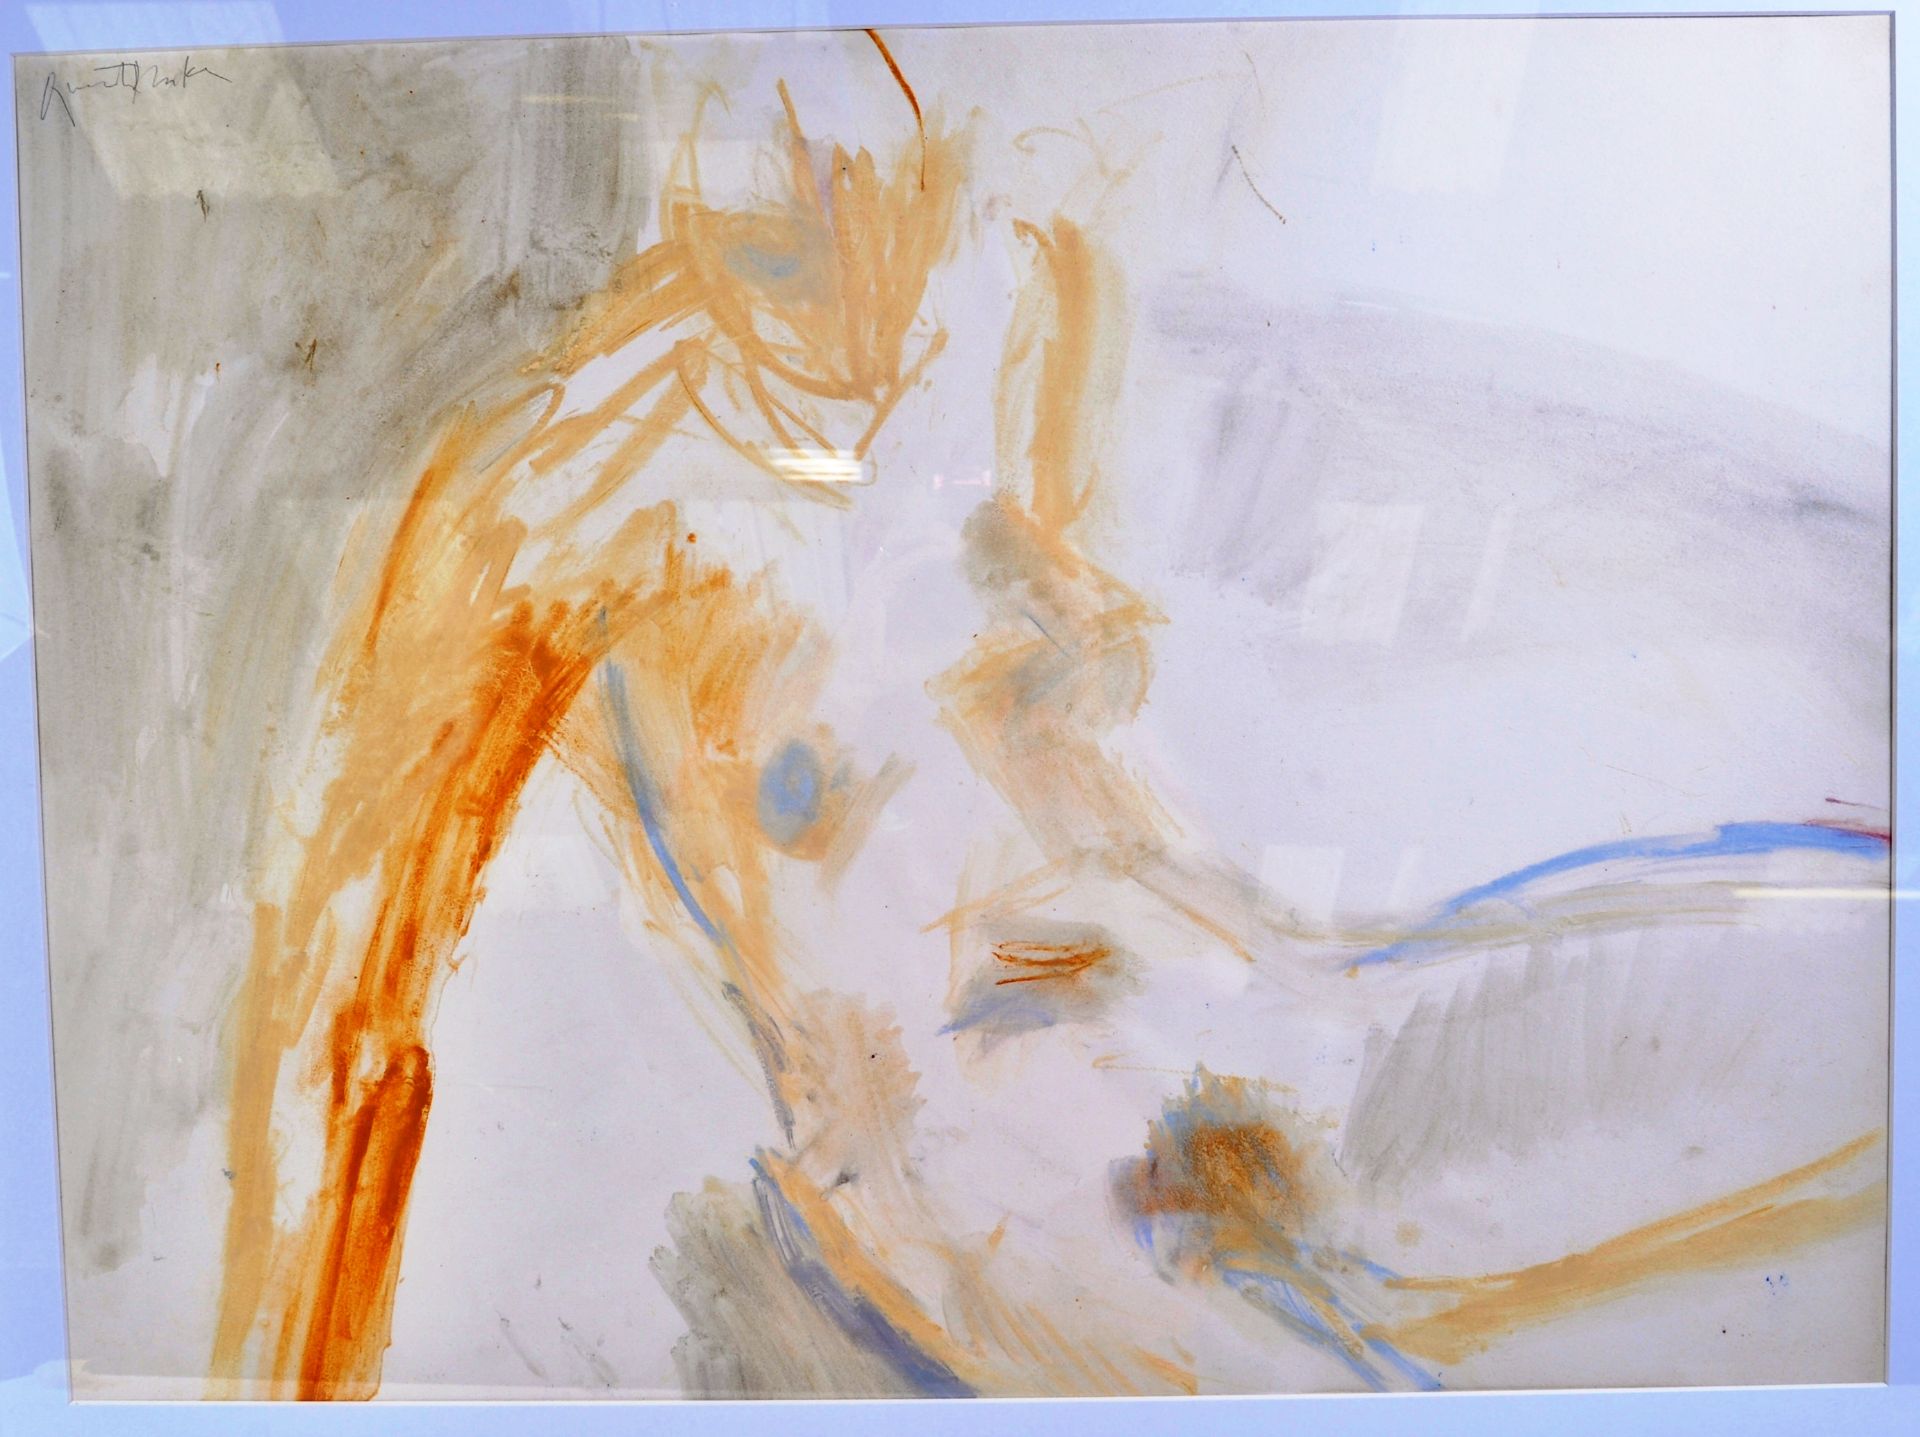 SIR QUENTIN BLAKE - NUDE - ORIGINAL WATERCOLOUR PAINTING STUDY - Image 3 of 9